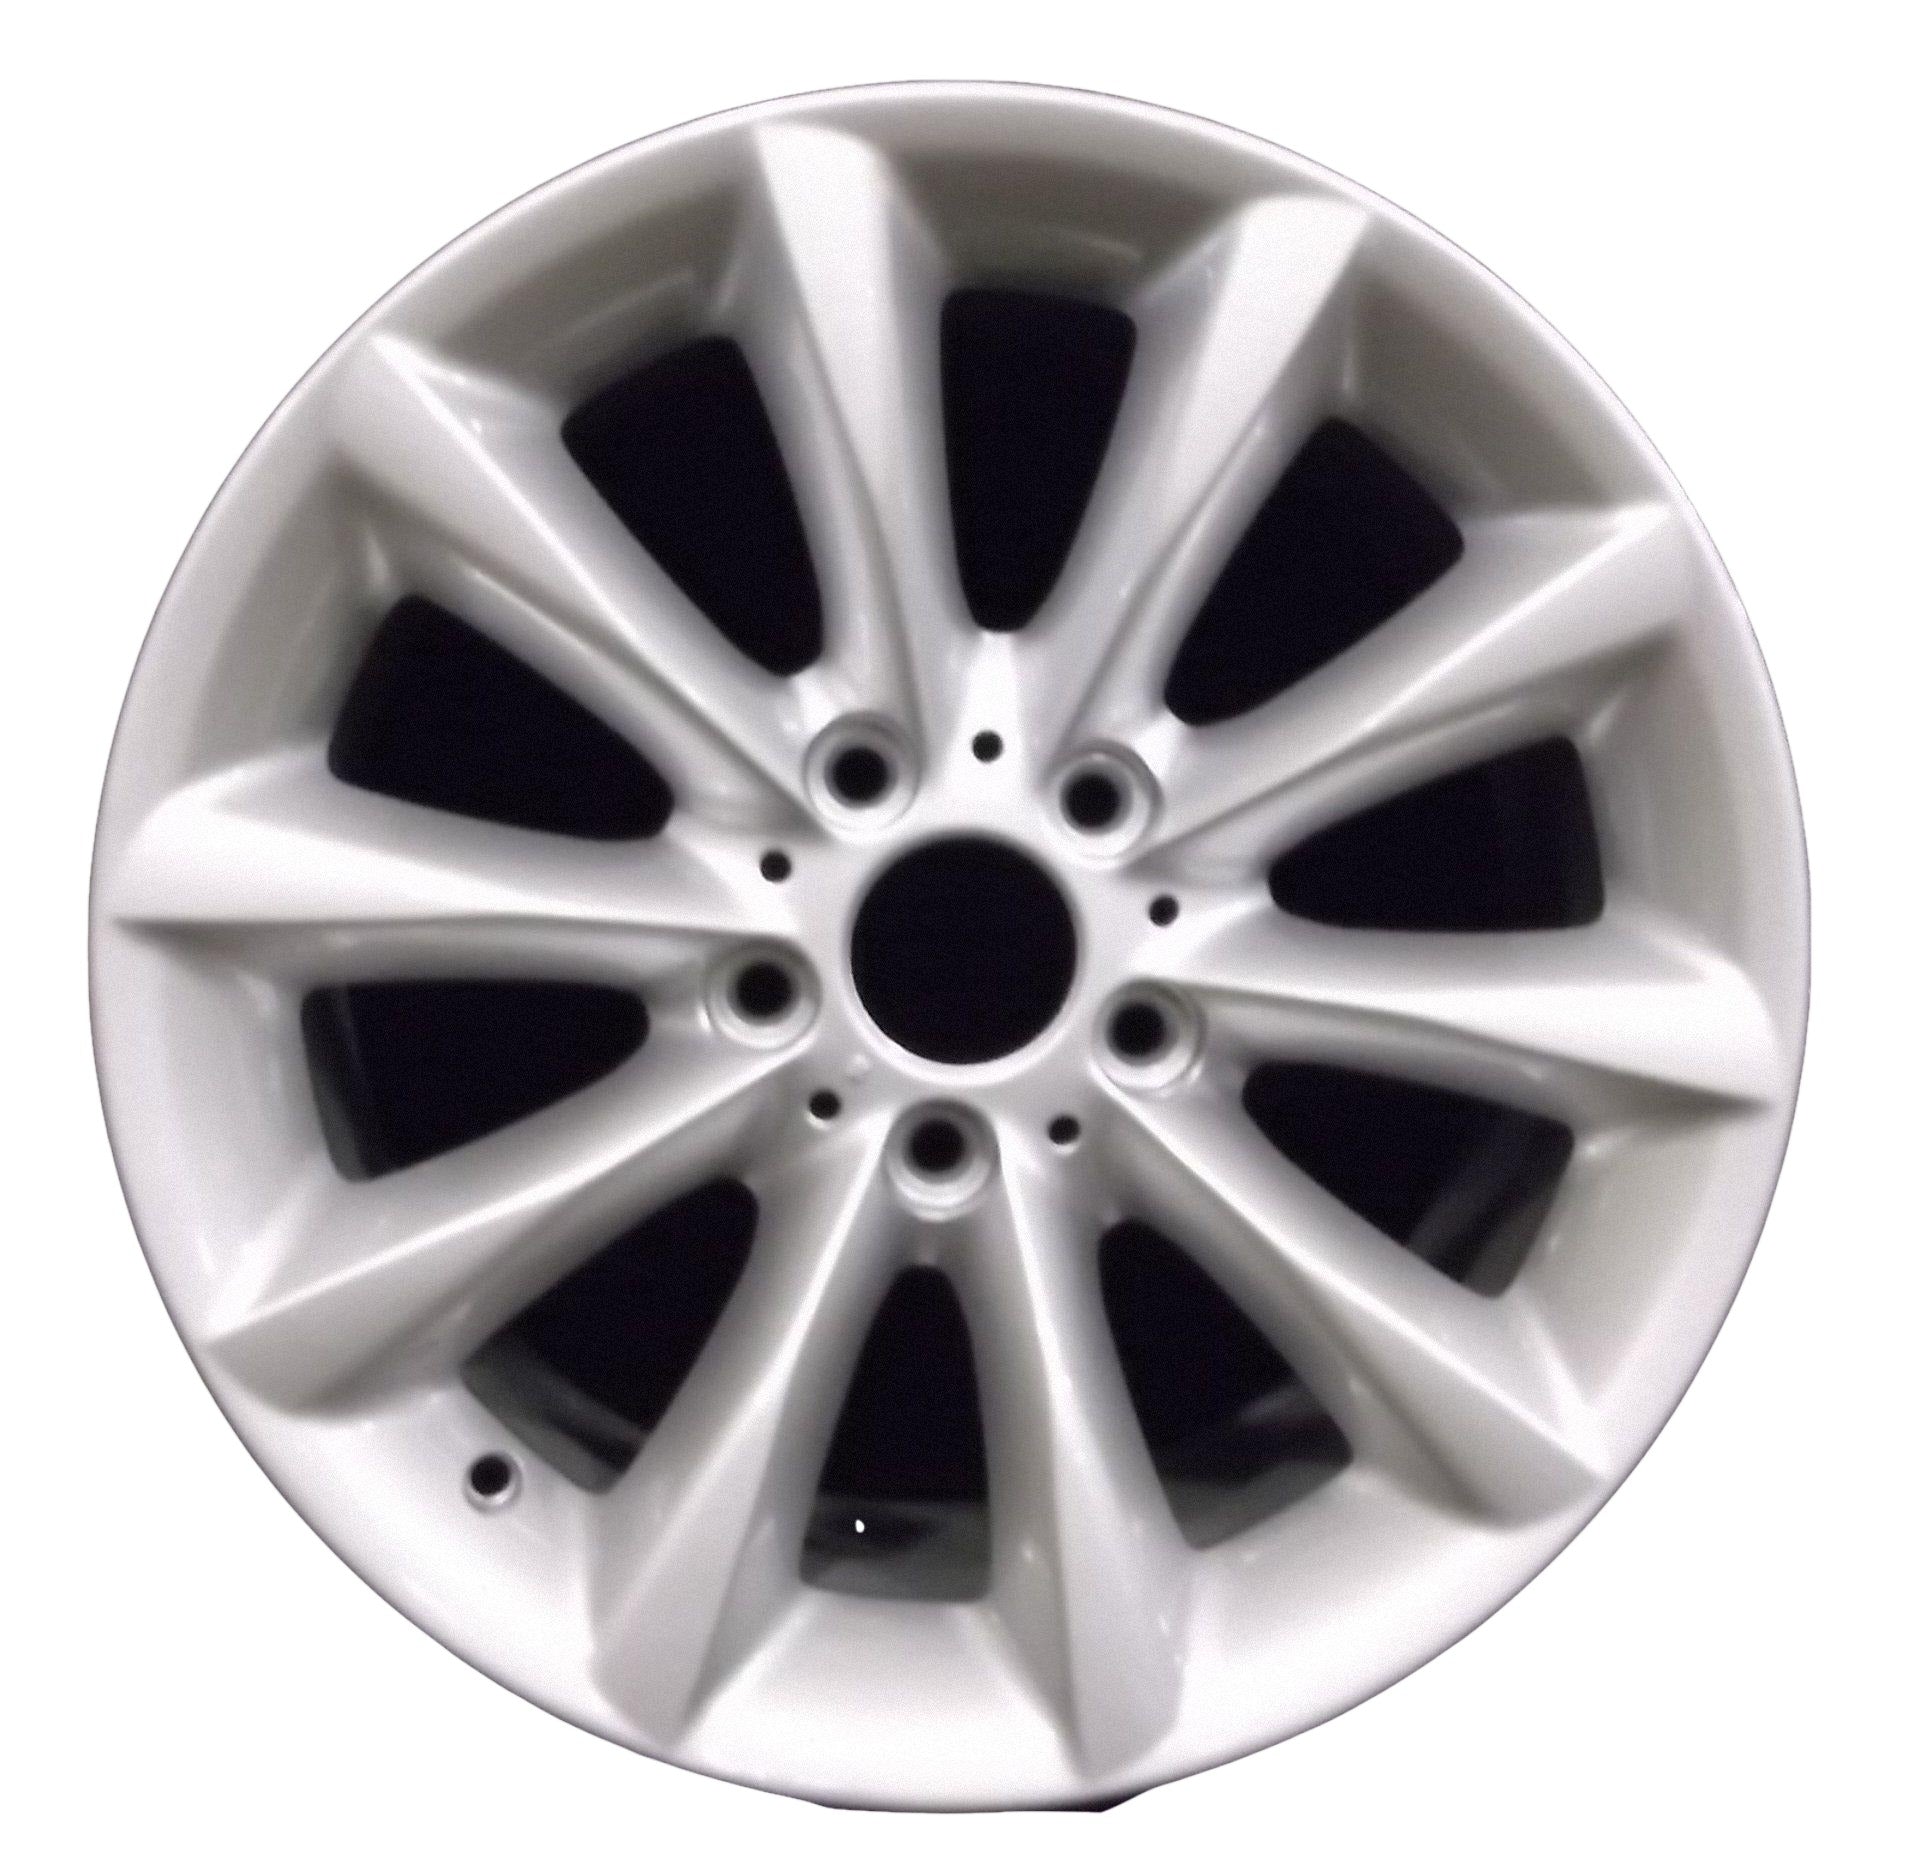 BMW 323i  2008, 2009, 2010, 2011, 2012 Factory OEM Car Wheel Size 17x8 Alloy WAO.71454FT.PS15.FF